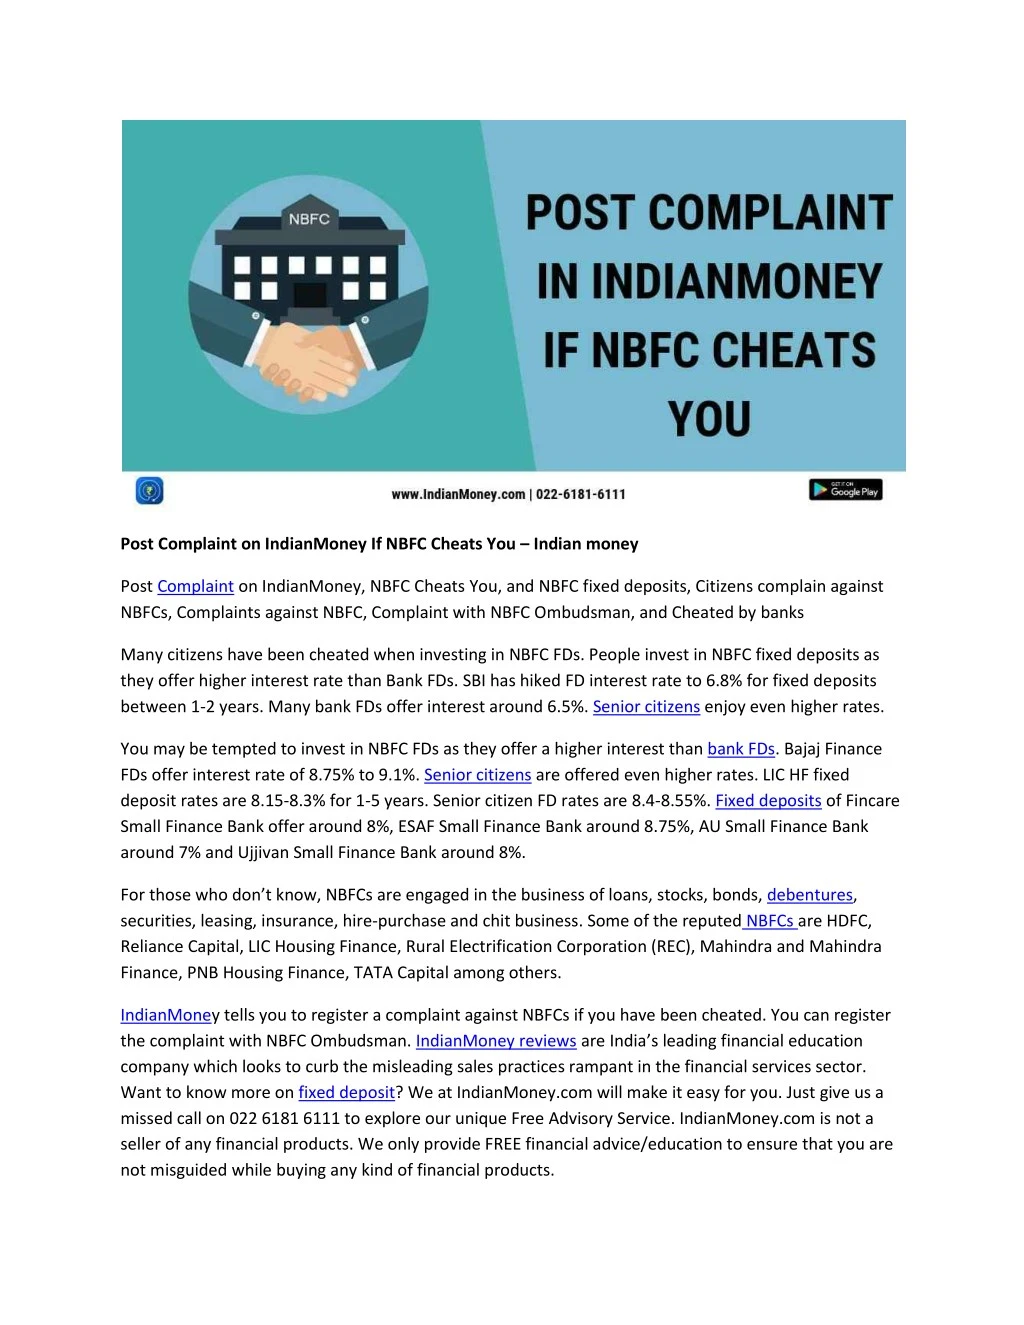 post complaint on indianmoney if nbfc cheats